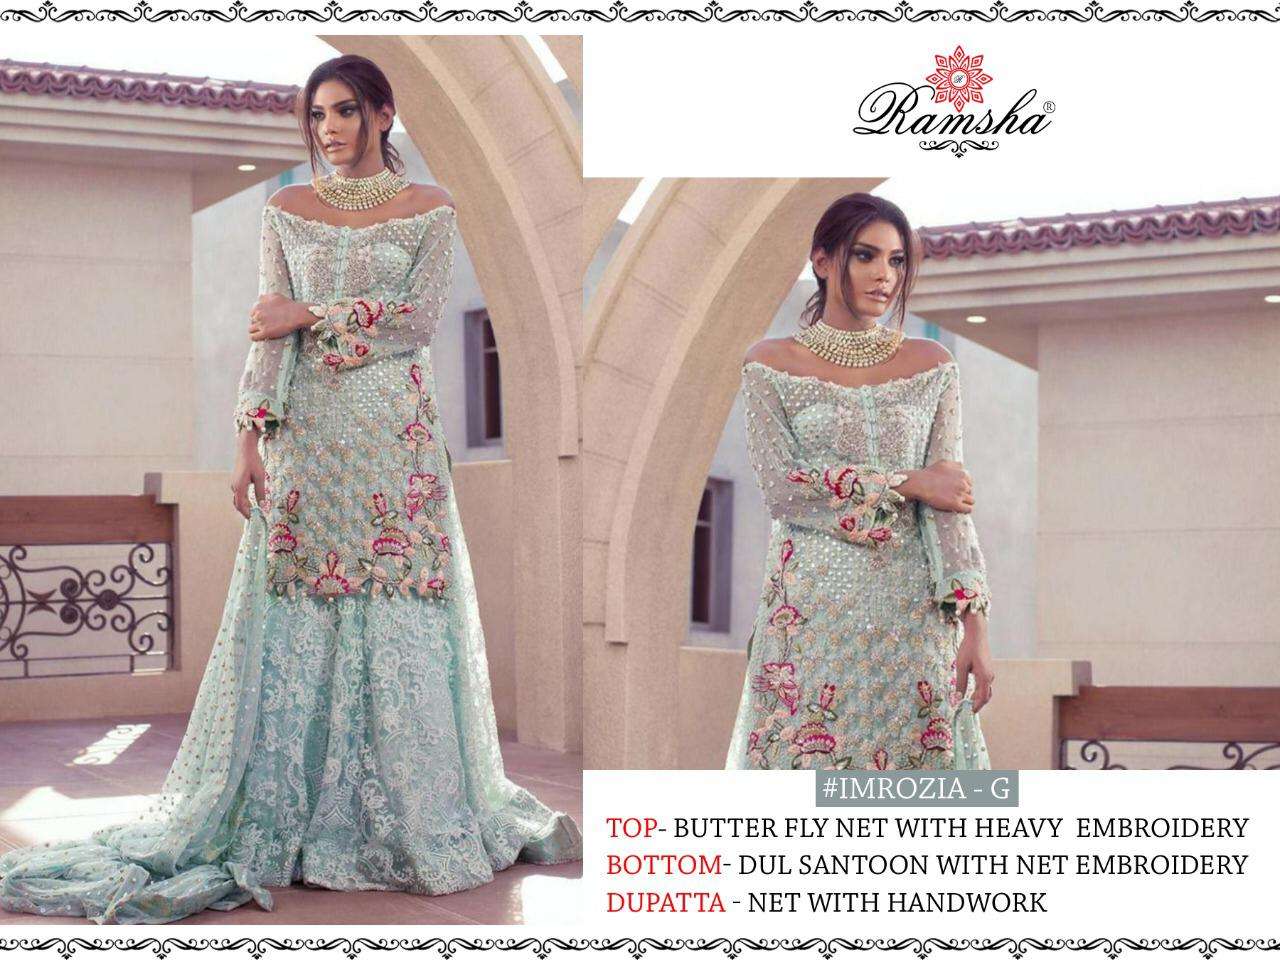 RAMSHA PRESENTS IMROZIA NX BUTTER FLY NET WITH HEAVY EMBROIDERY DESIGNER PAKISTANI SUITS